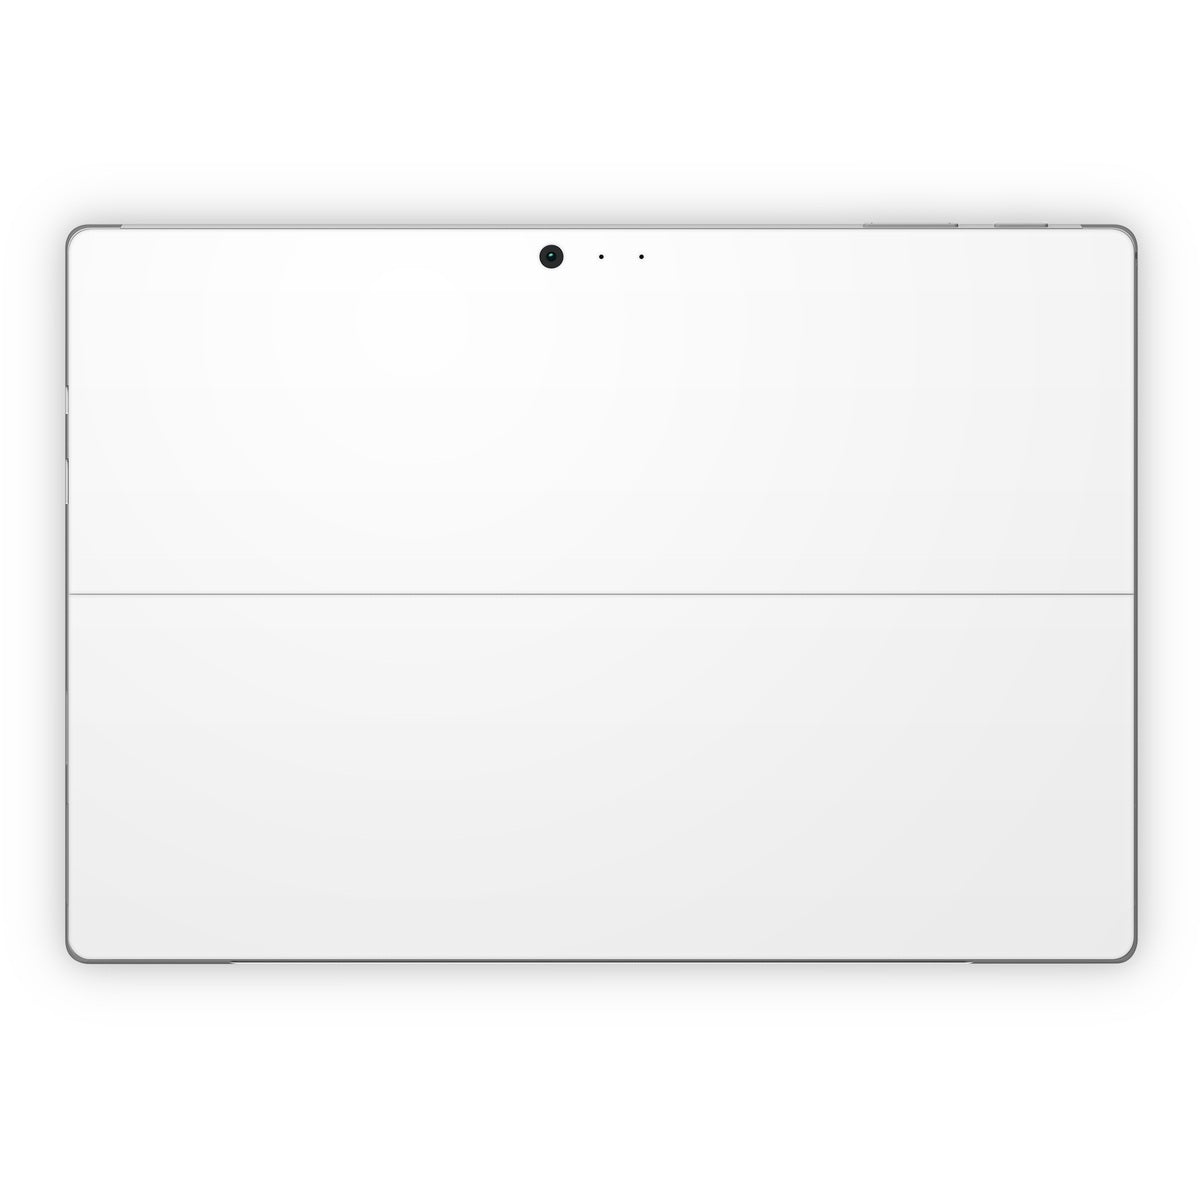 Solid State White - Microsoft Surface Pro Skin